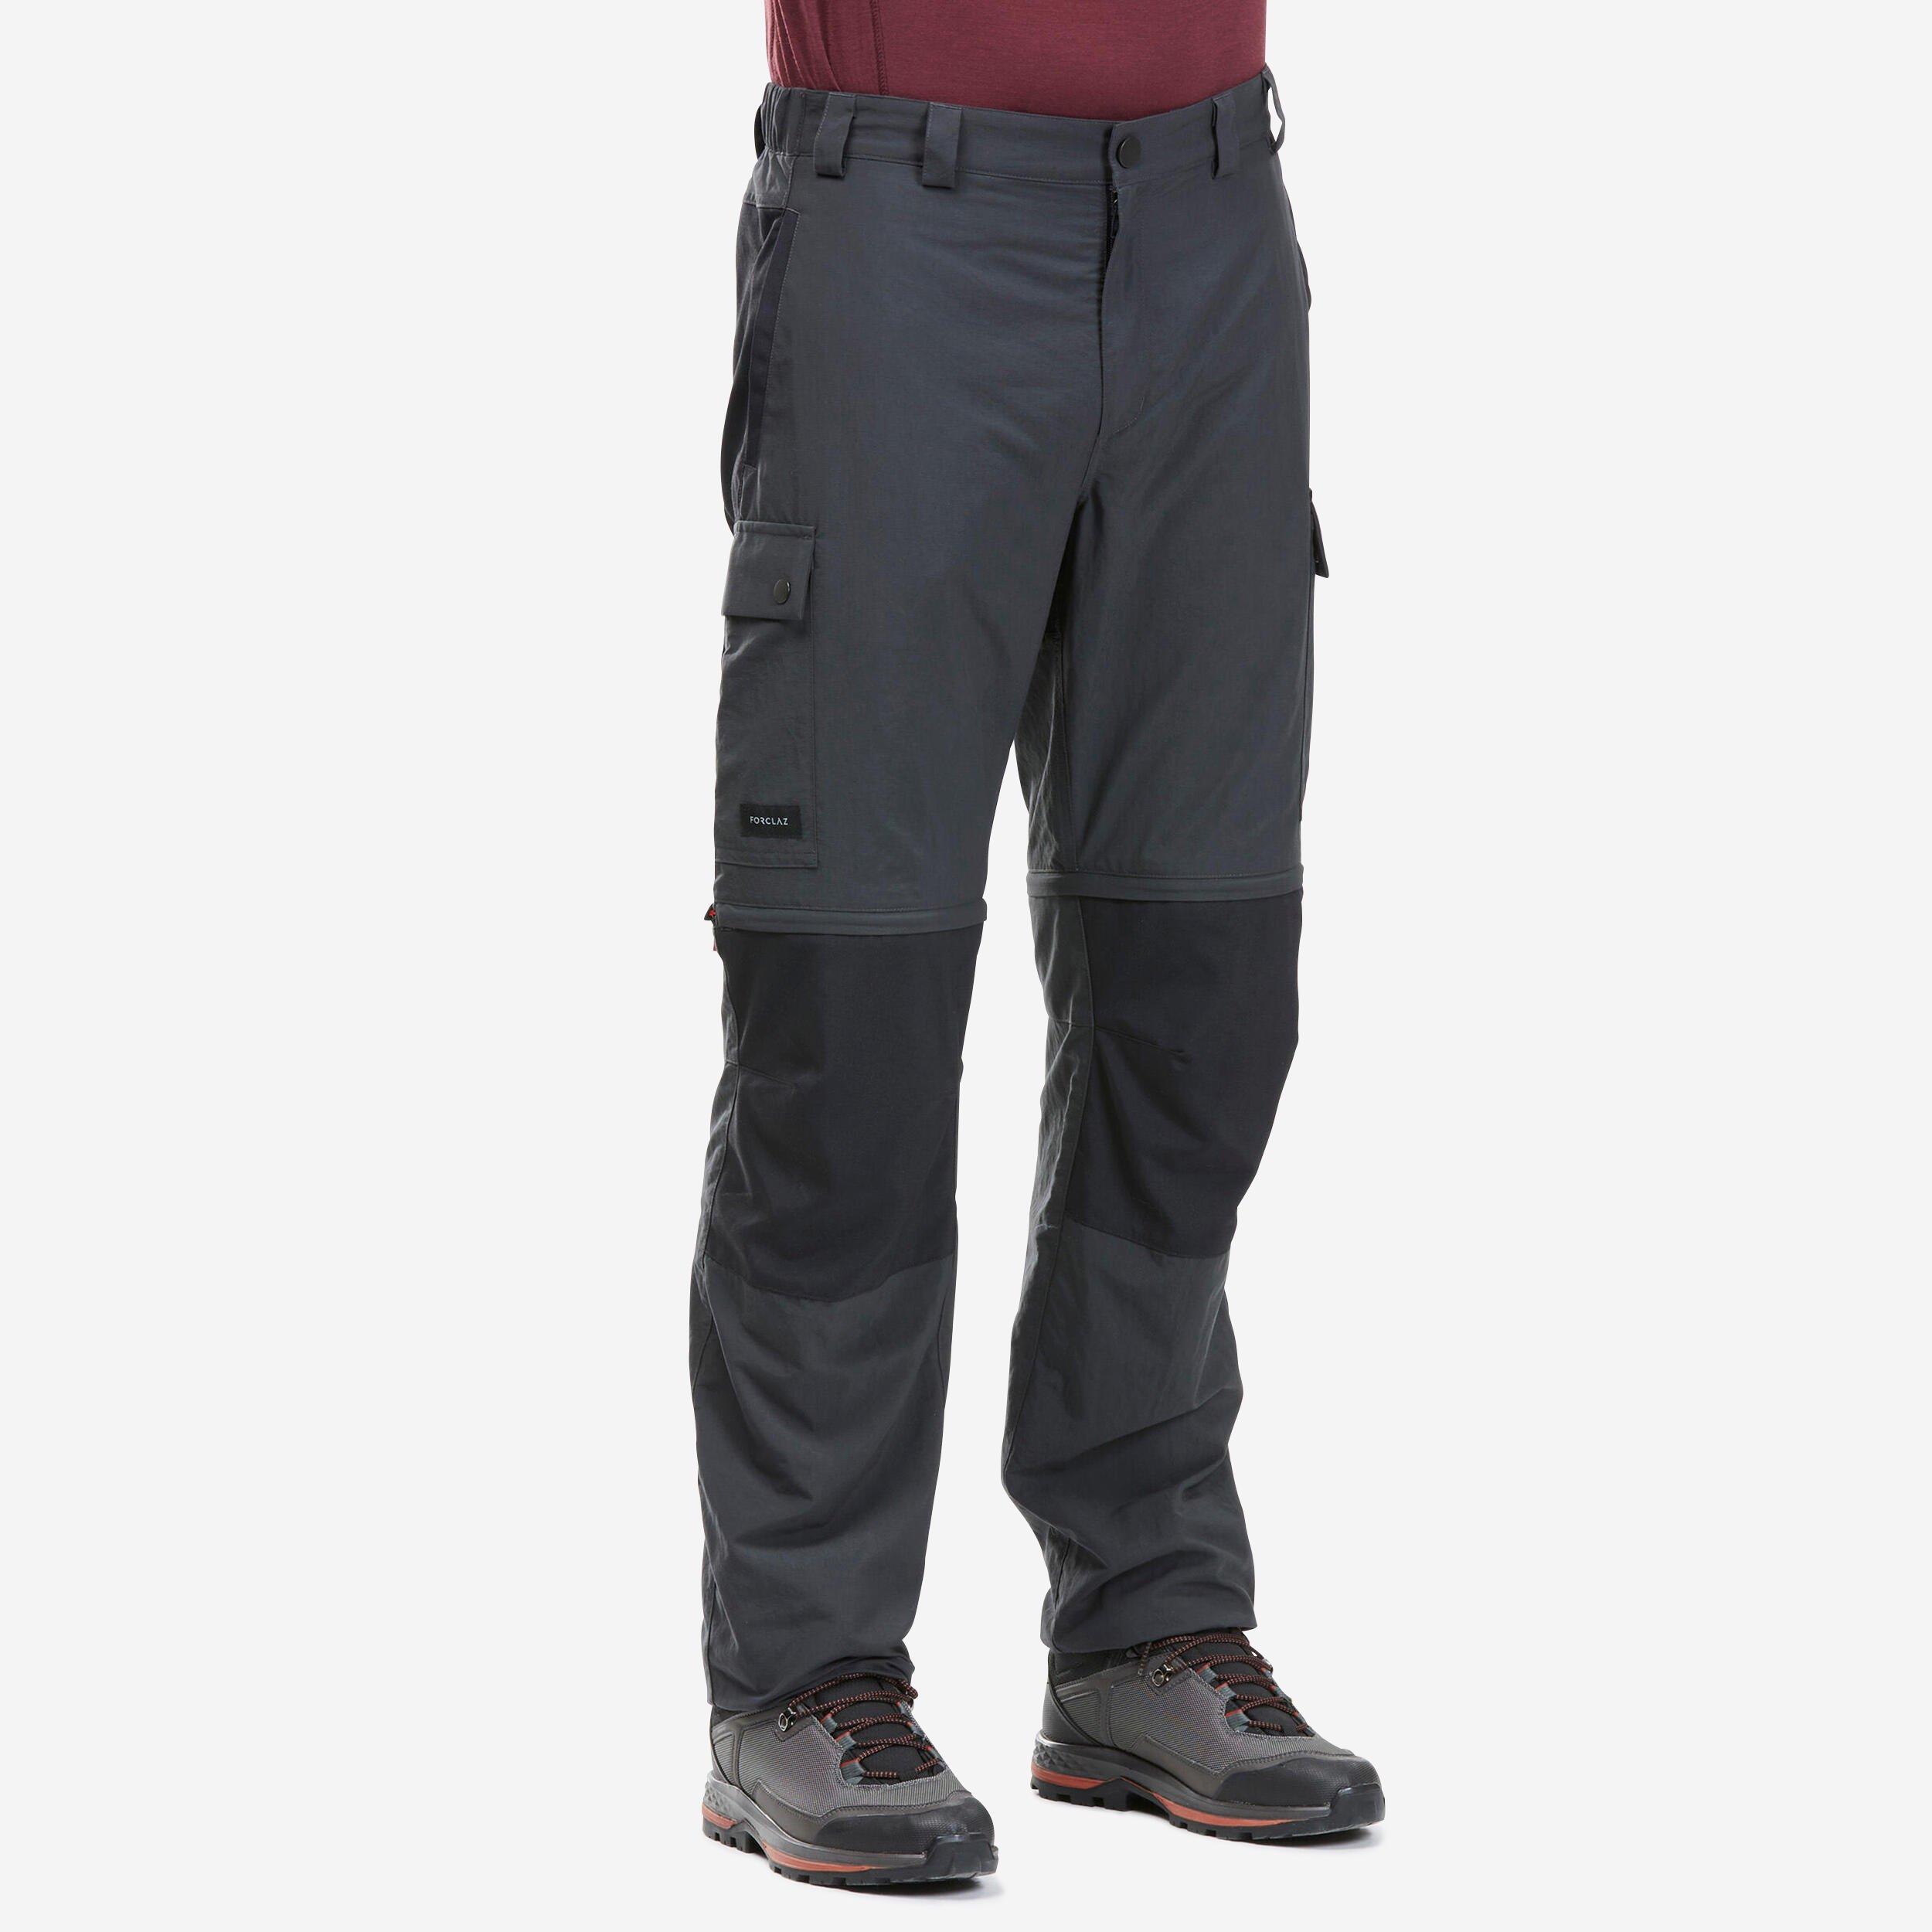 KIPSTA CR 300 Adult Cricket Trousers : Amazon.in: Clothing & Accessories